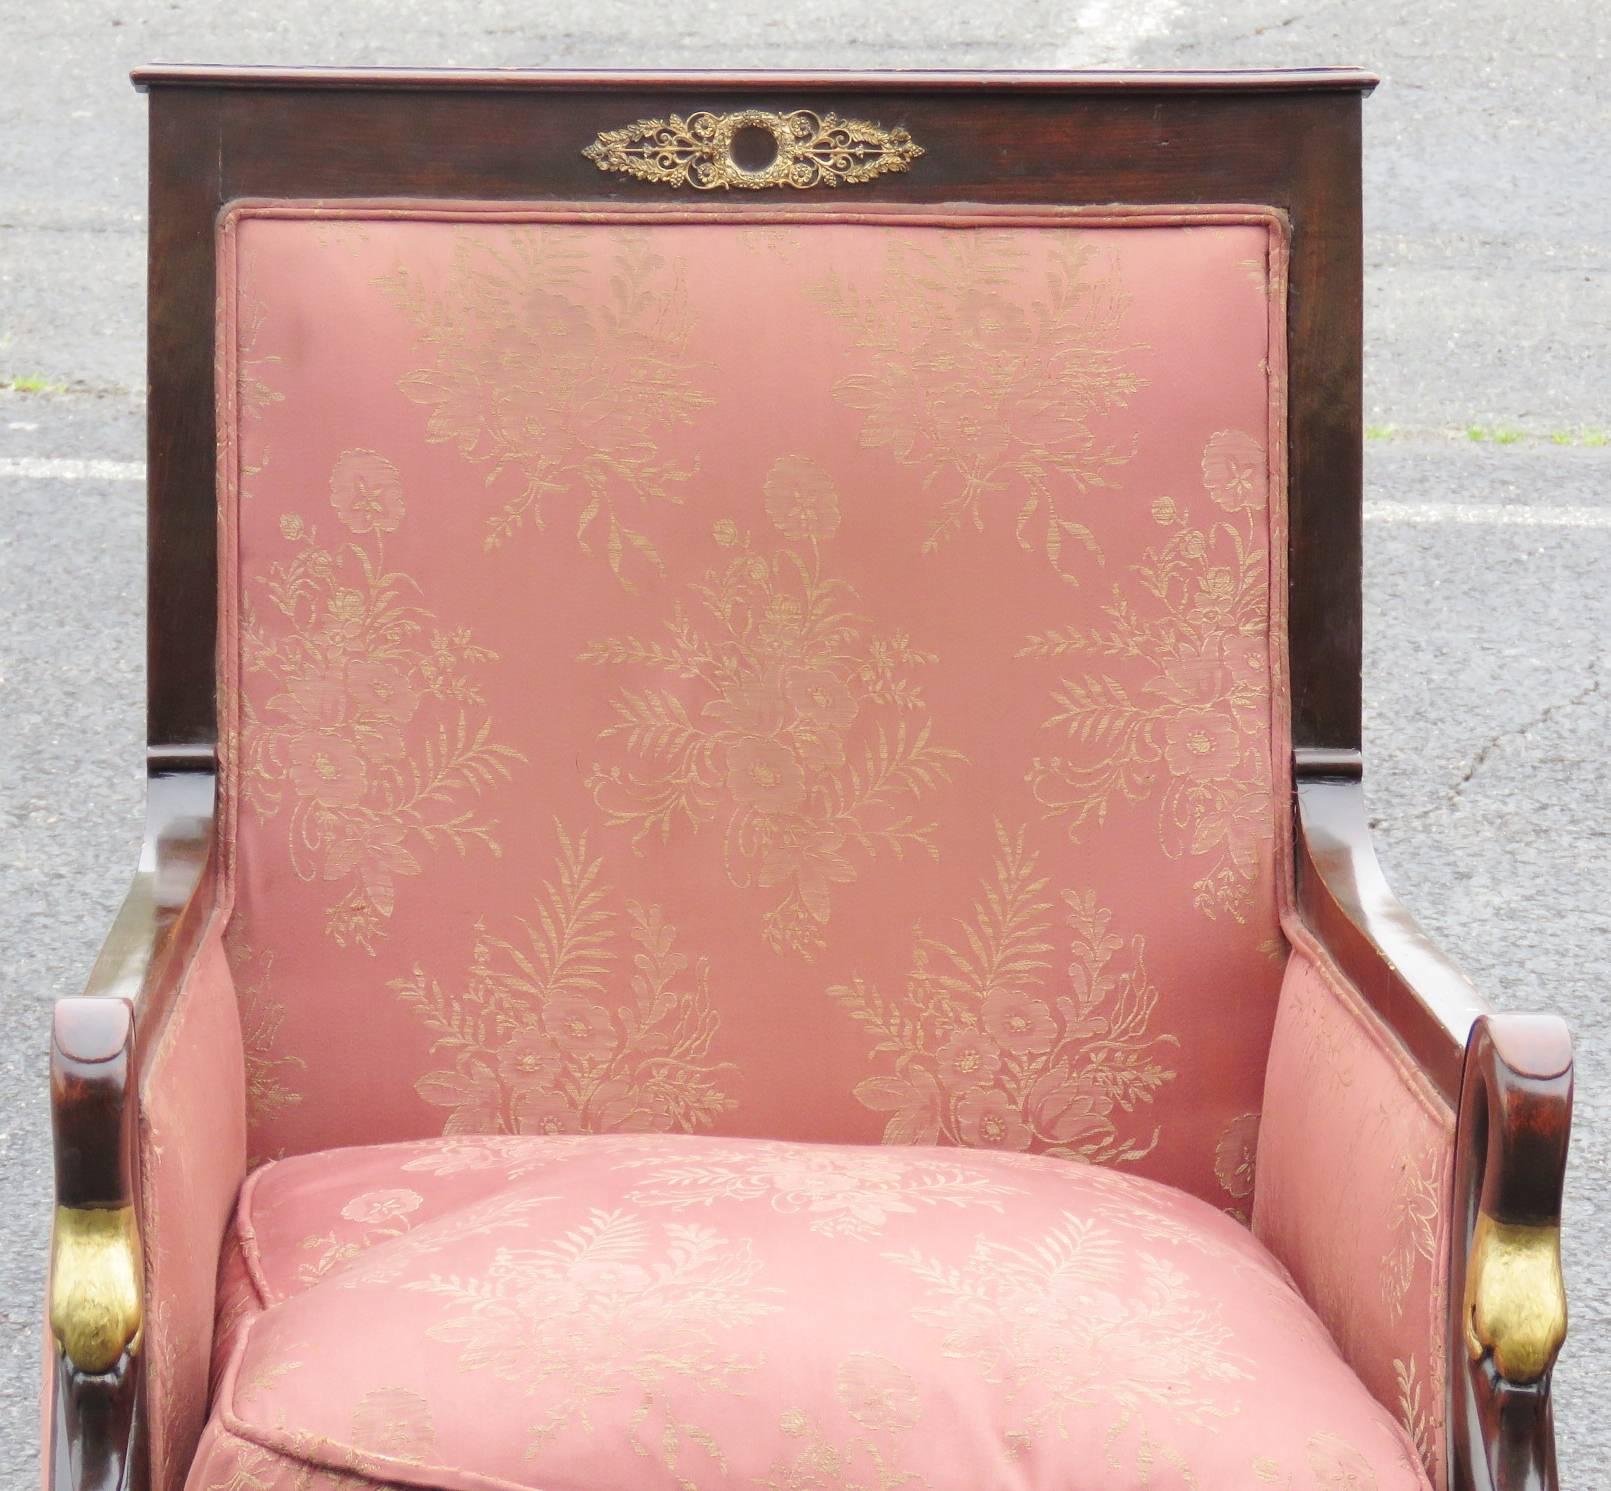 Gilt painted swans heads. Pink damask upholstery. Metal mounts and claw feet.